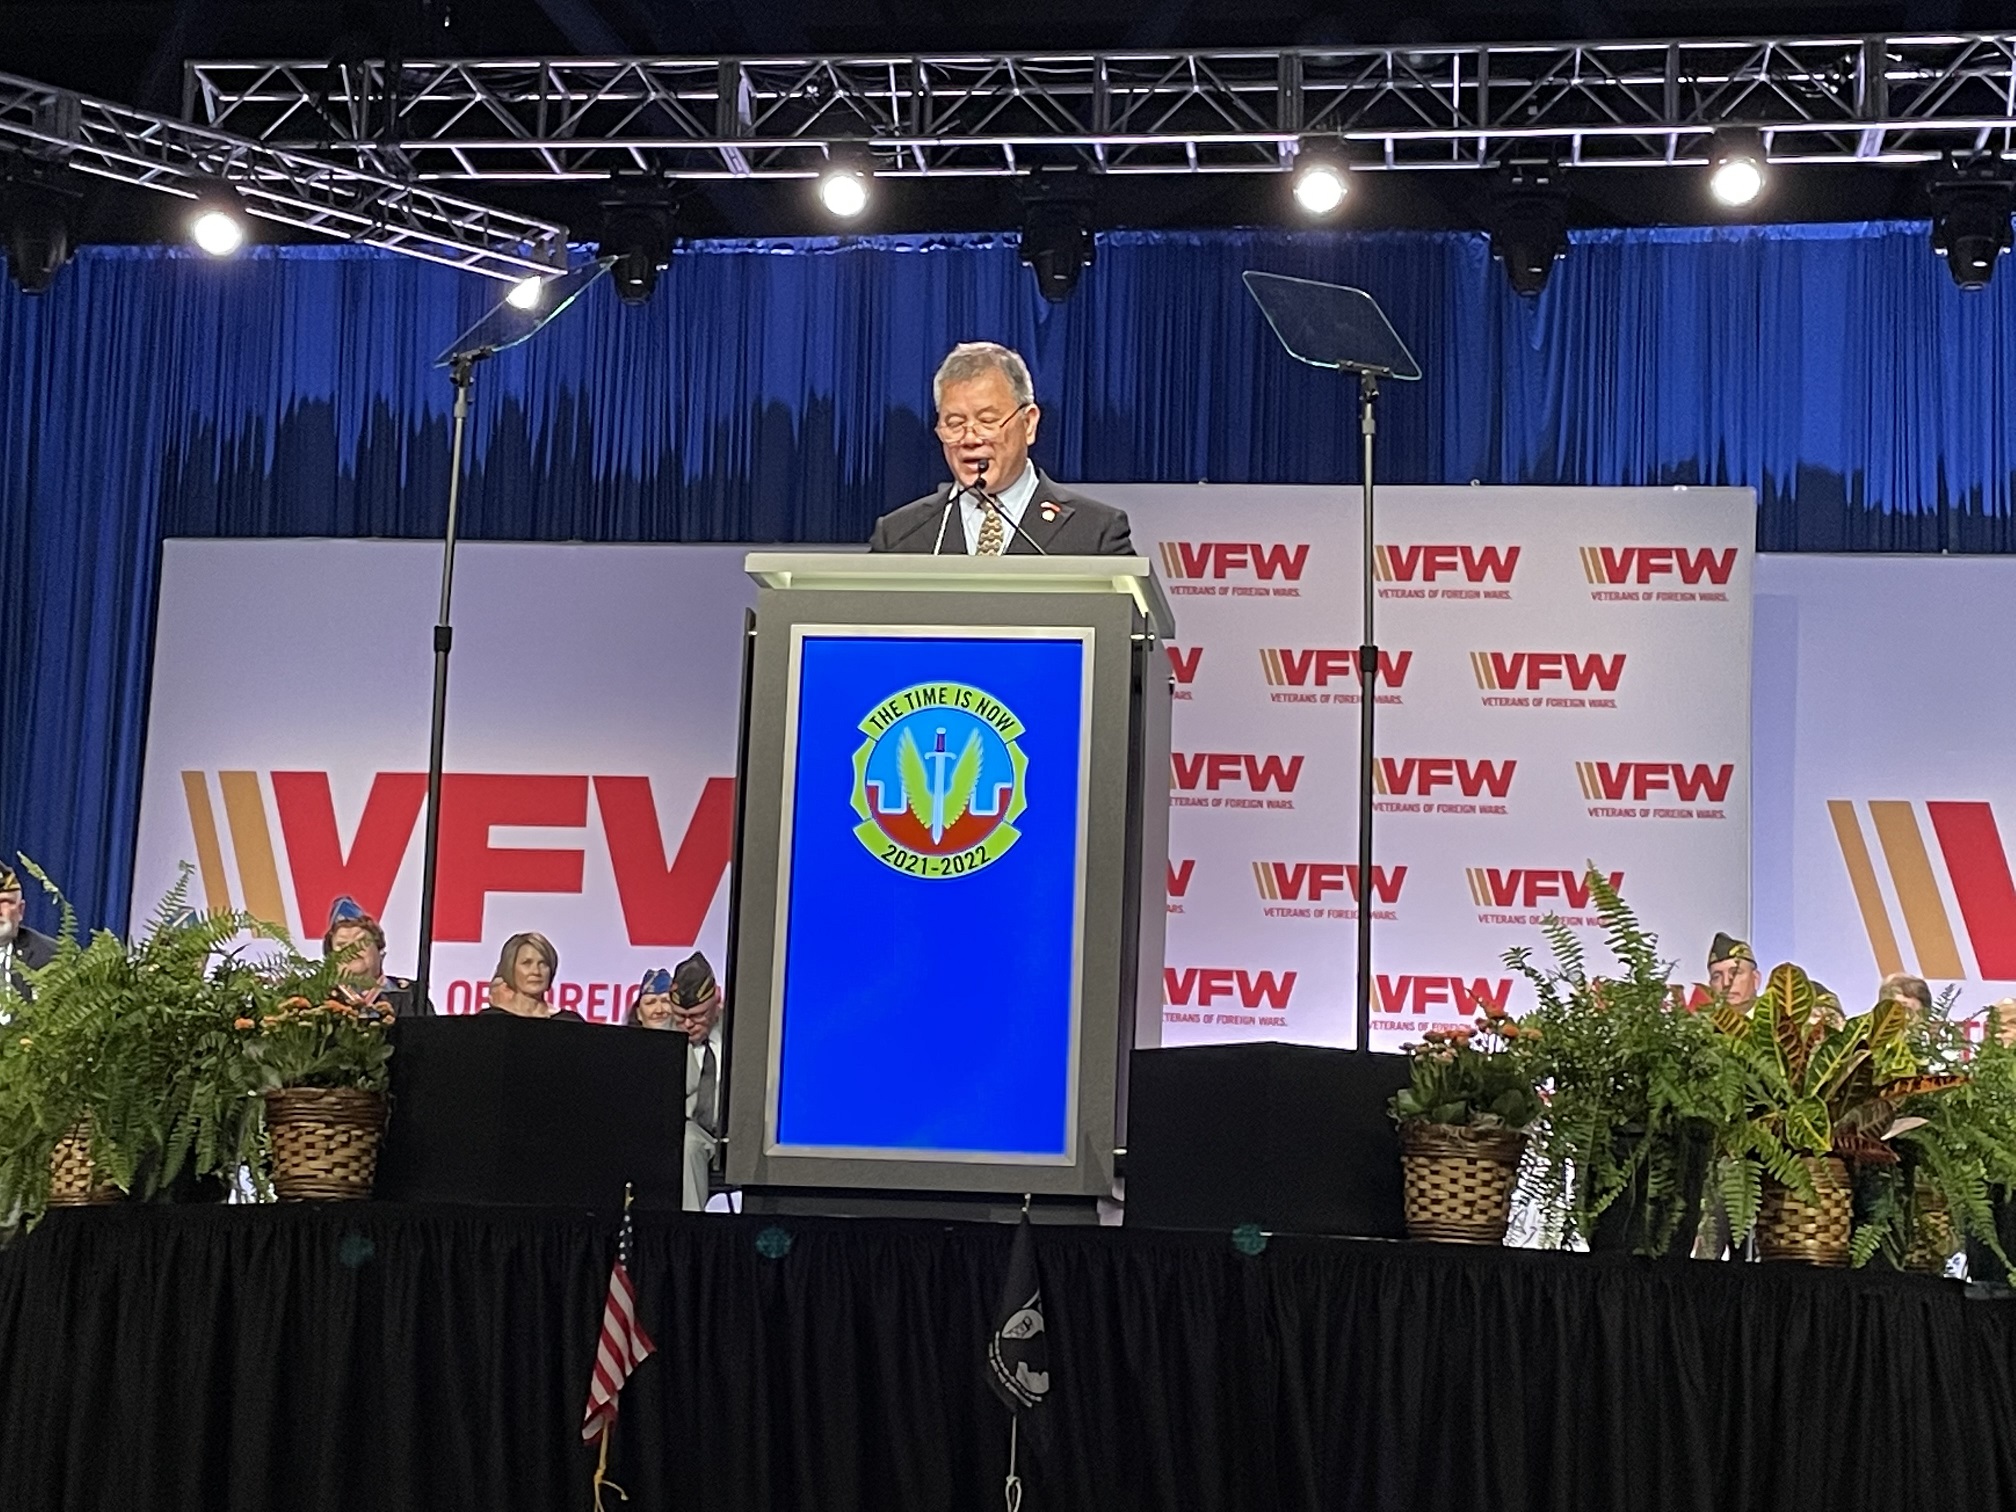 Vice Minister Wu delivered an address at the 2022 VFW Convention